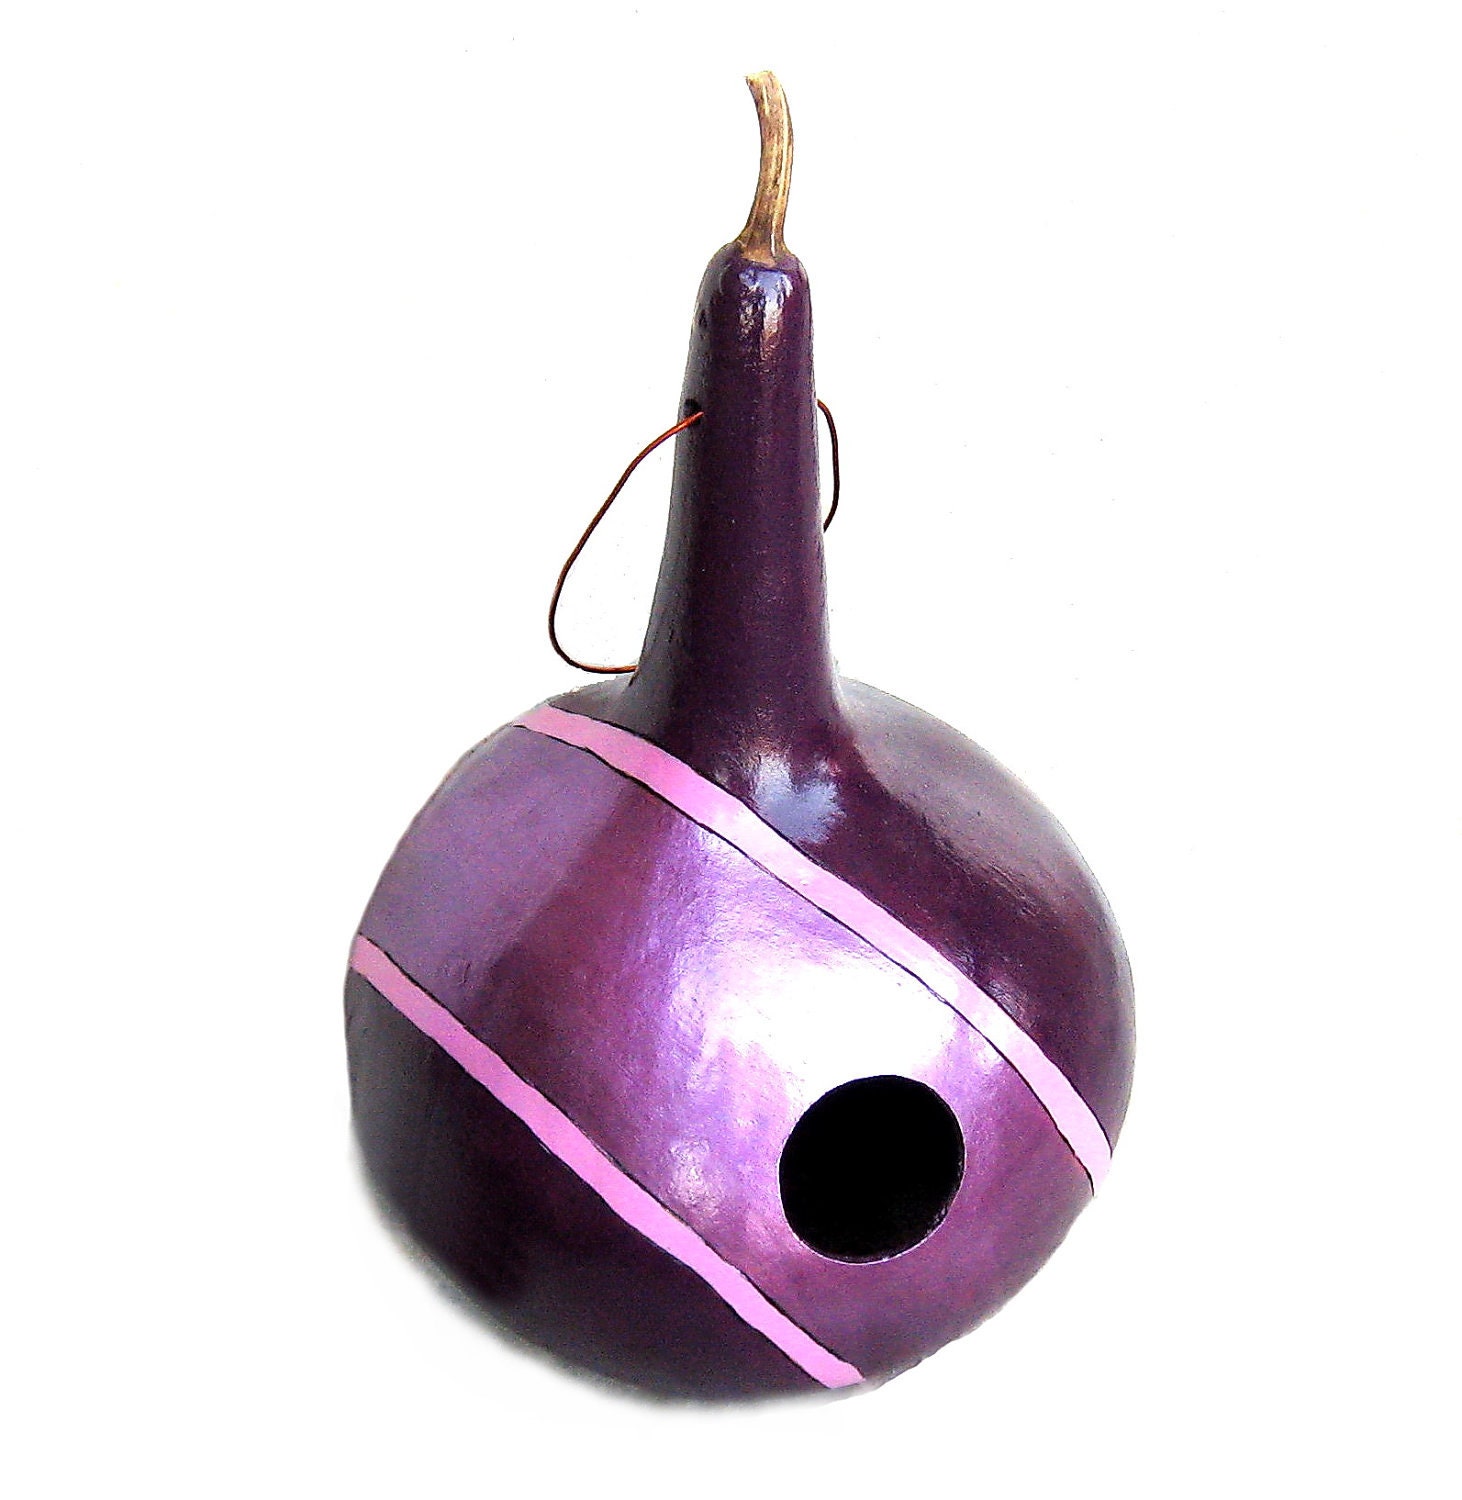 Painted Gourd Birdhouse Purple Nest Box Contemporary Lavender Pearl Pink Stripes - midnightcoiler